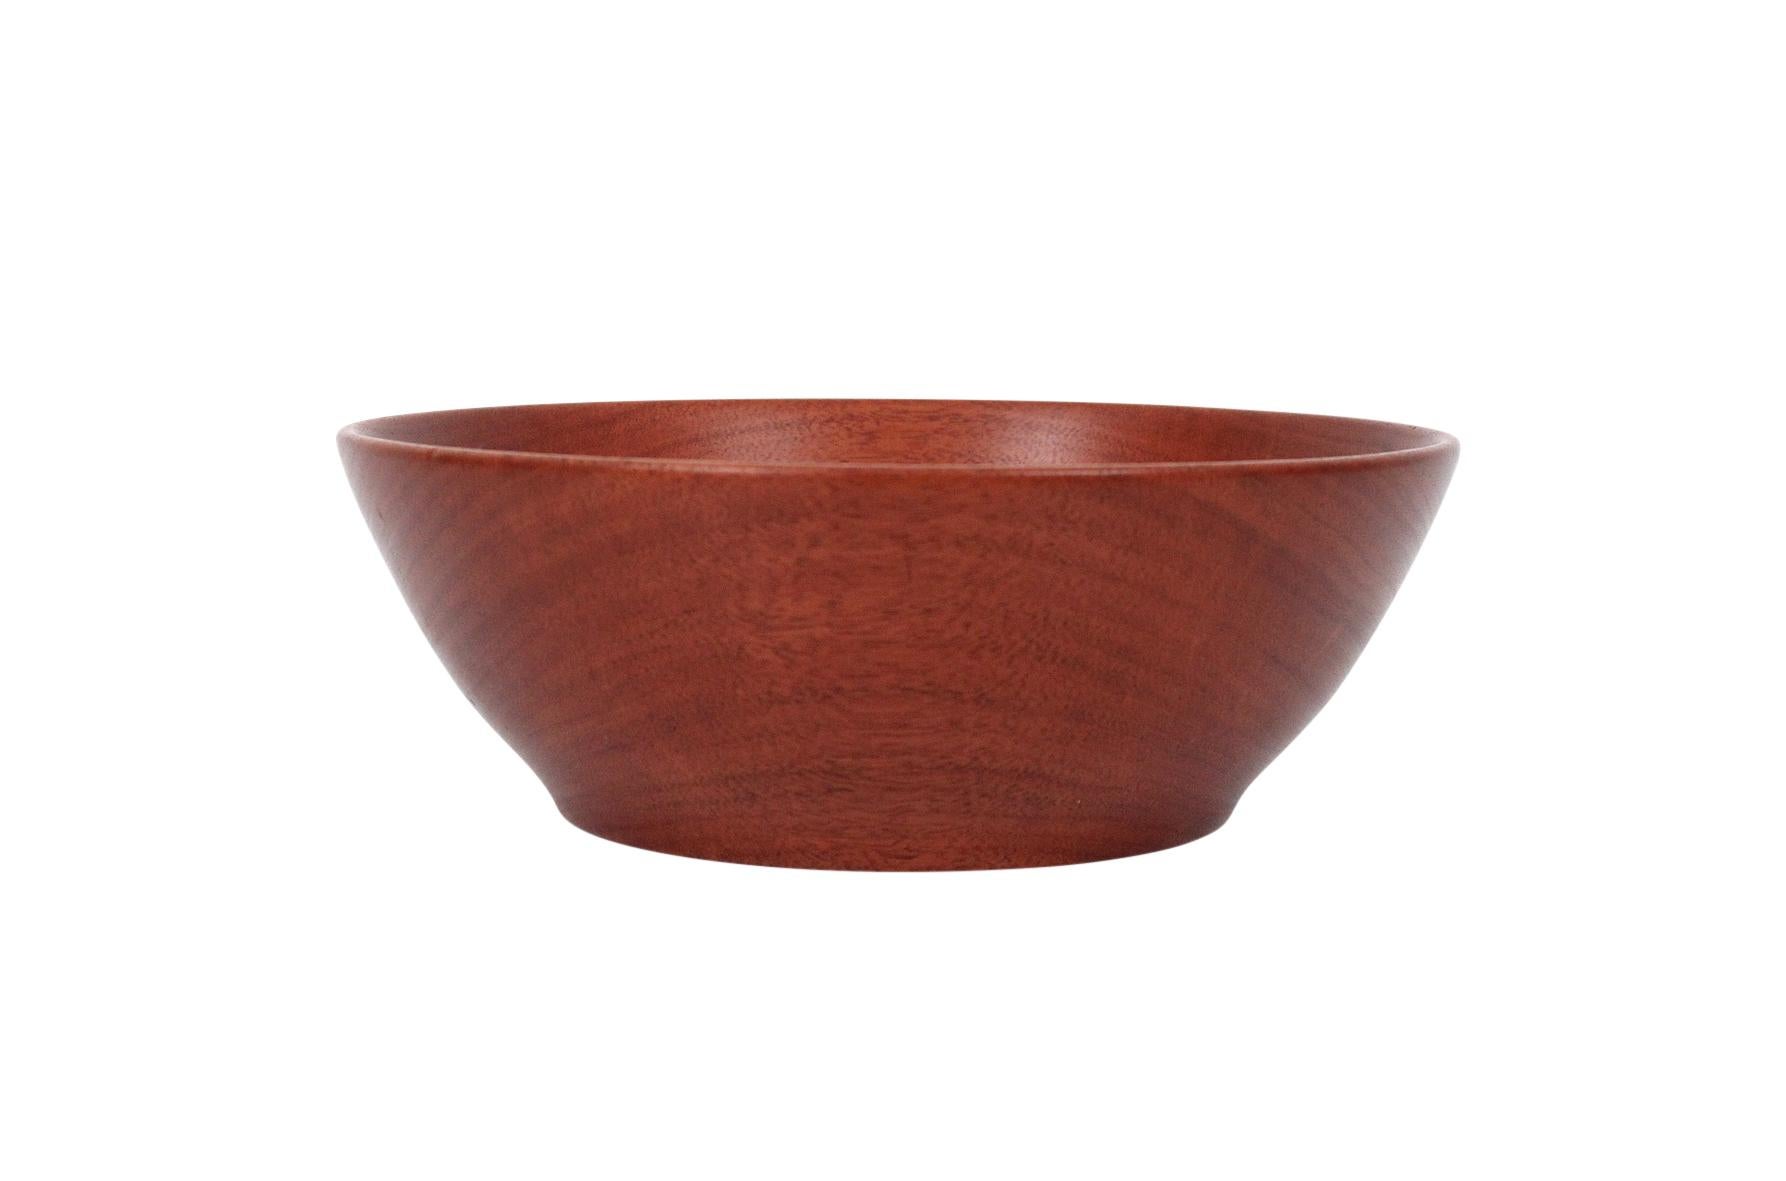 Large turned wood salad bowl by noted New Hampshire craftsman Gordon Keeler. Keeler widely exhibited his turned wood bowls in New England for many decades. Signed with Keelers mark to underside.